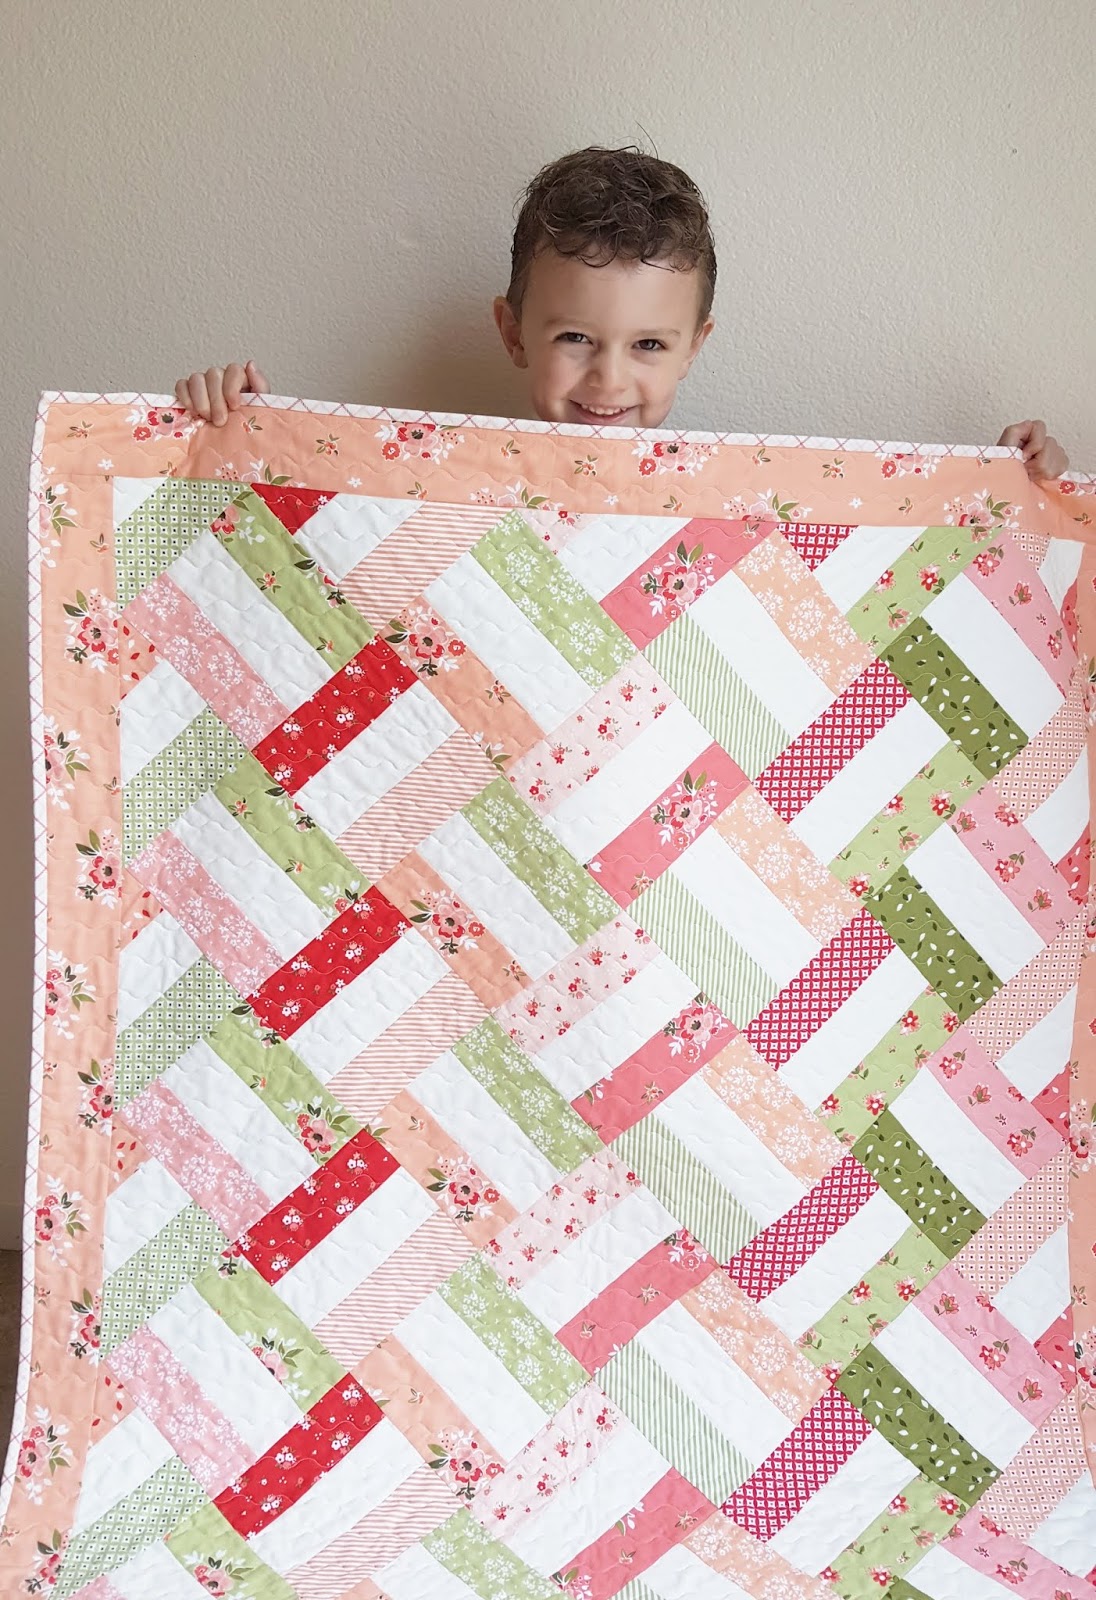 Free Baby Quilt Pattern For Beginners - Baby Girl Quilt Pattern